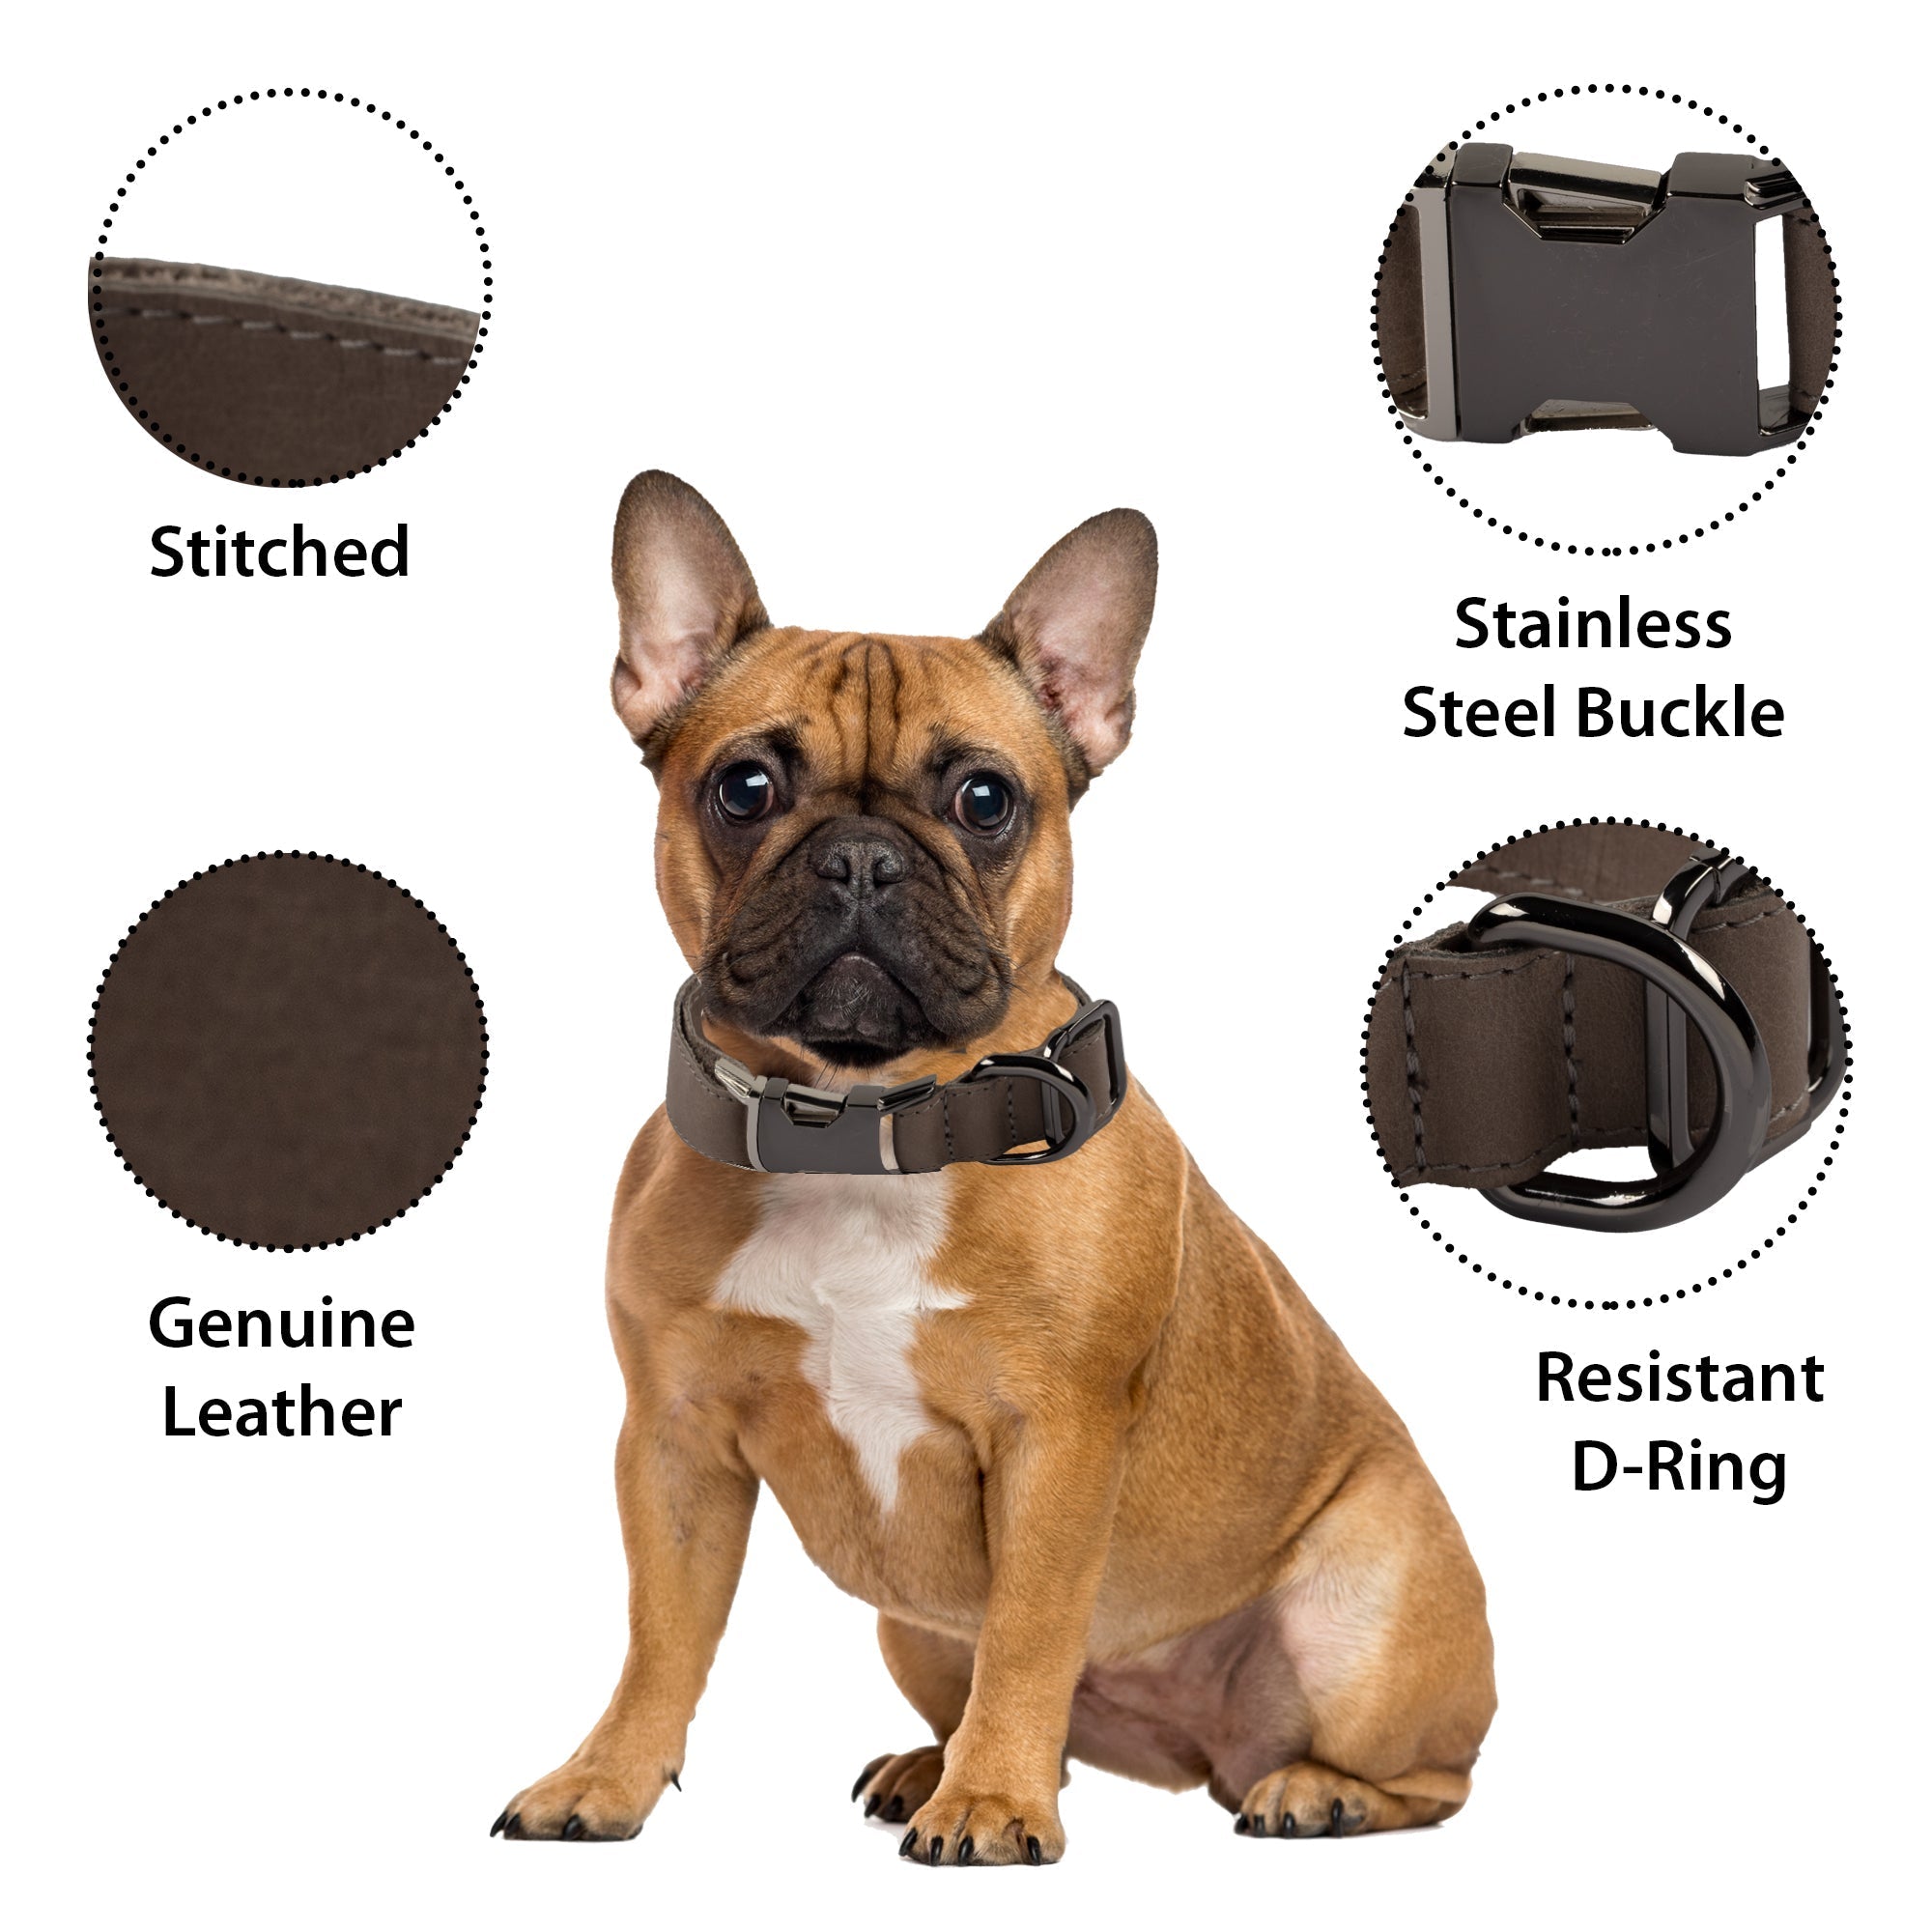 LupinnyLeather Genuine Leather Adjustable Strong Dog Collar for Large Medium Small Dogs 99